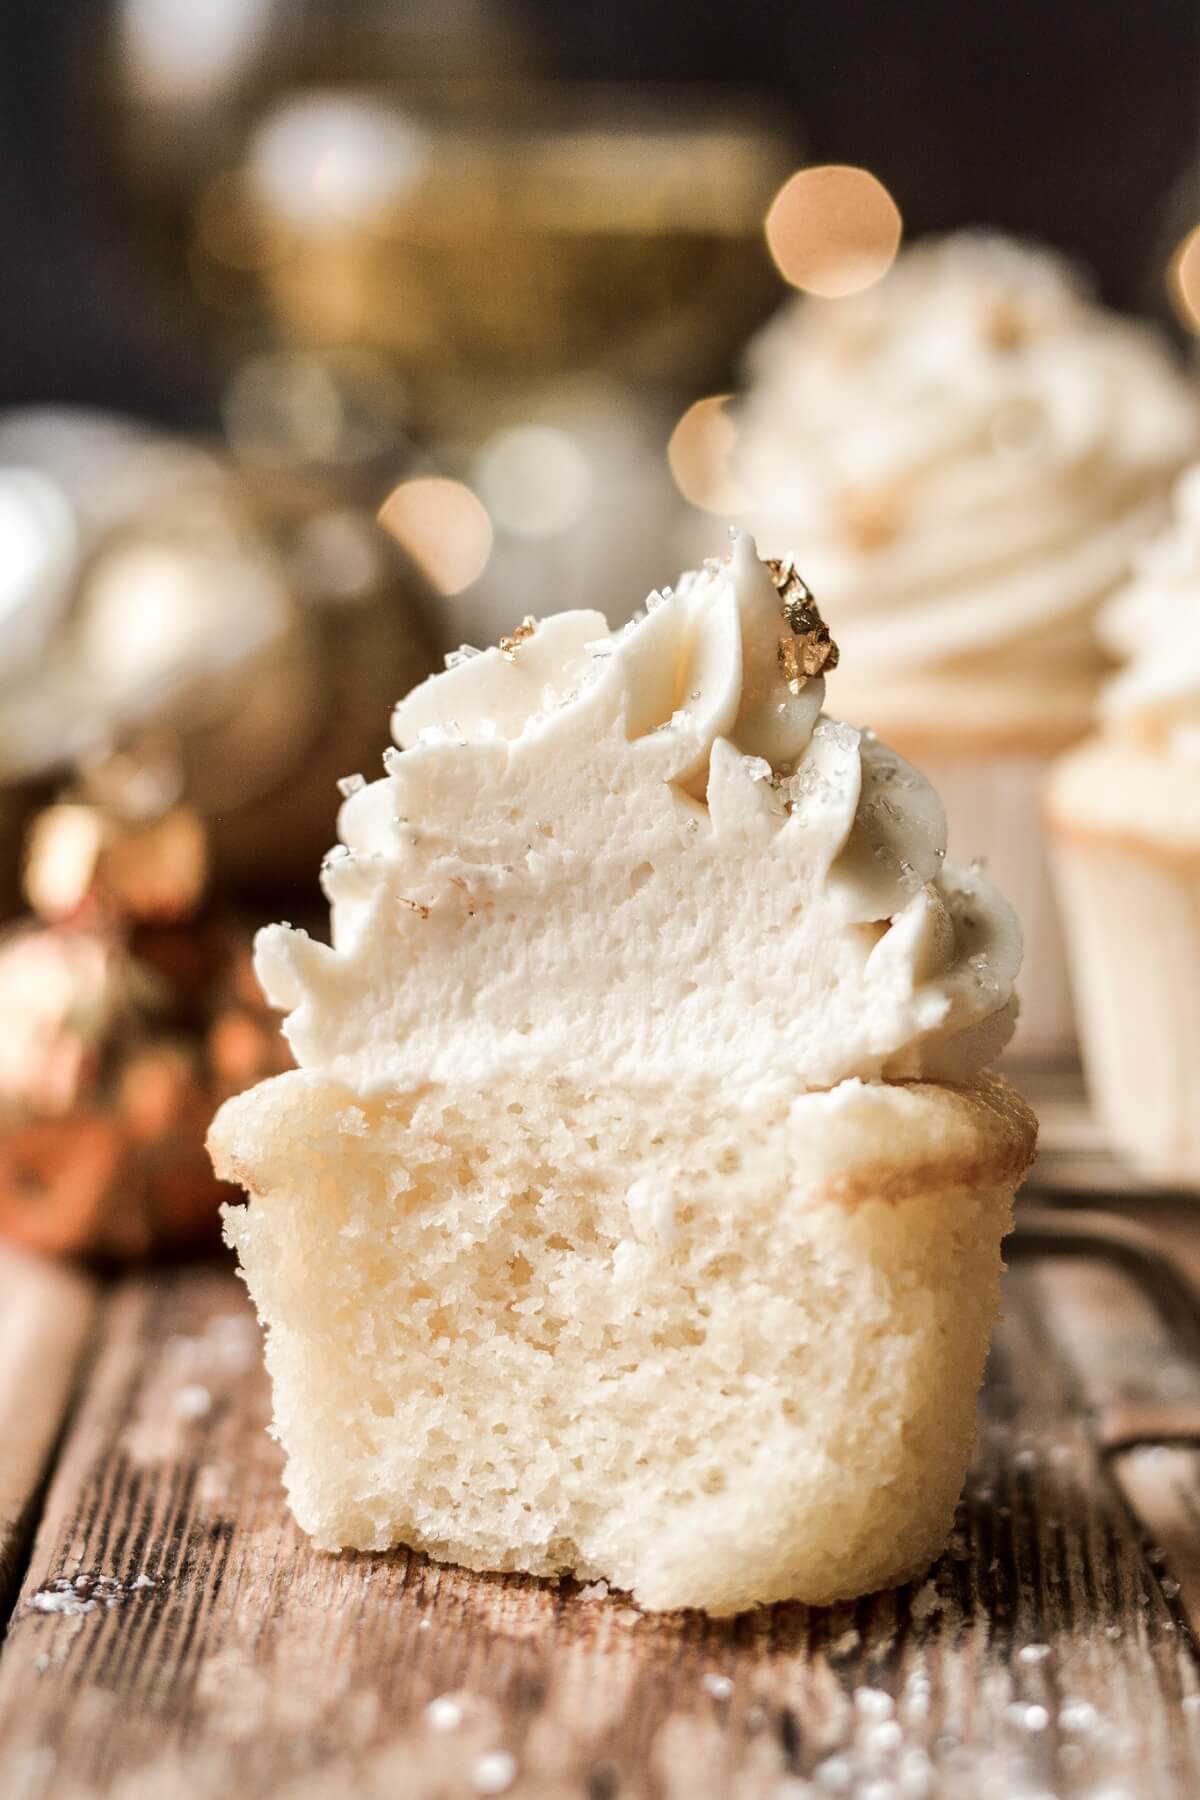 Champagne cupcake with a bite taken.